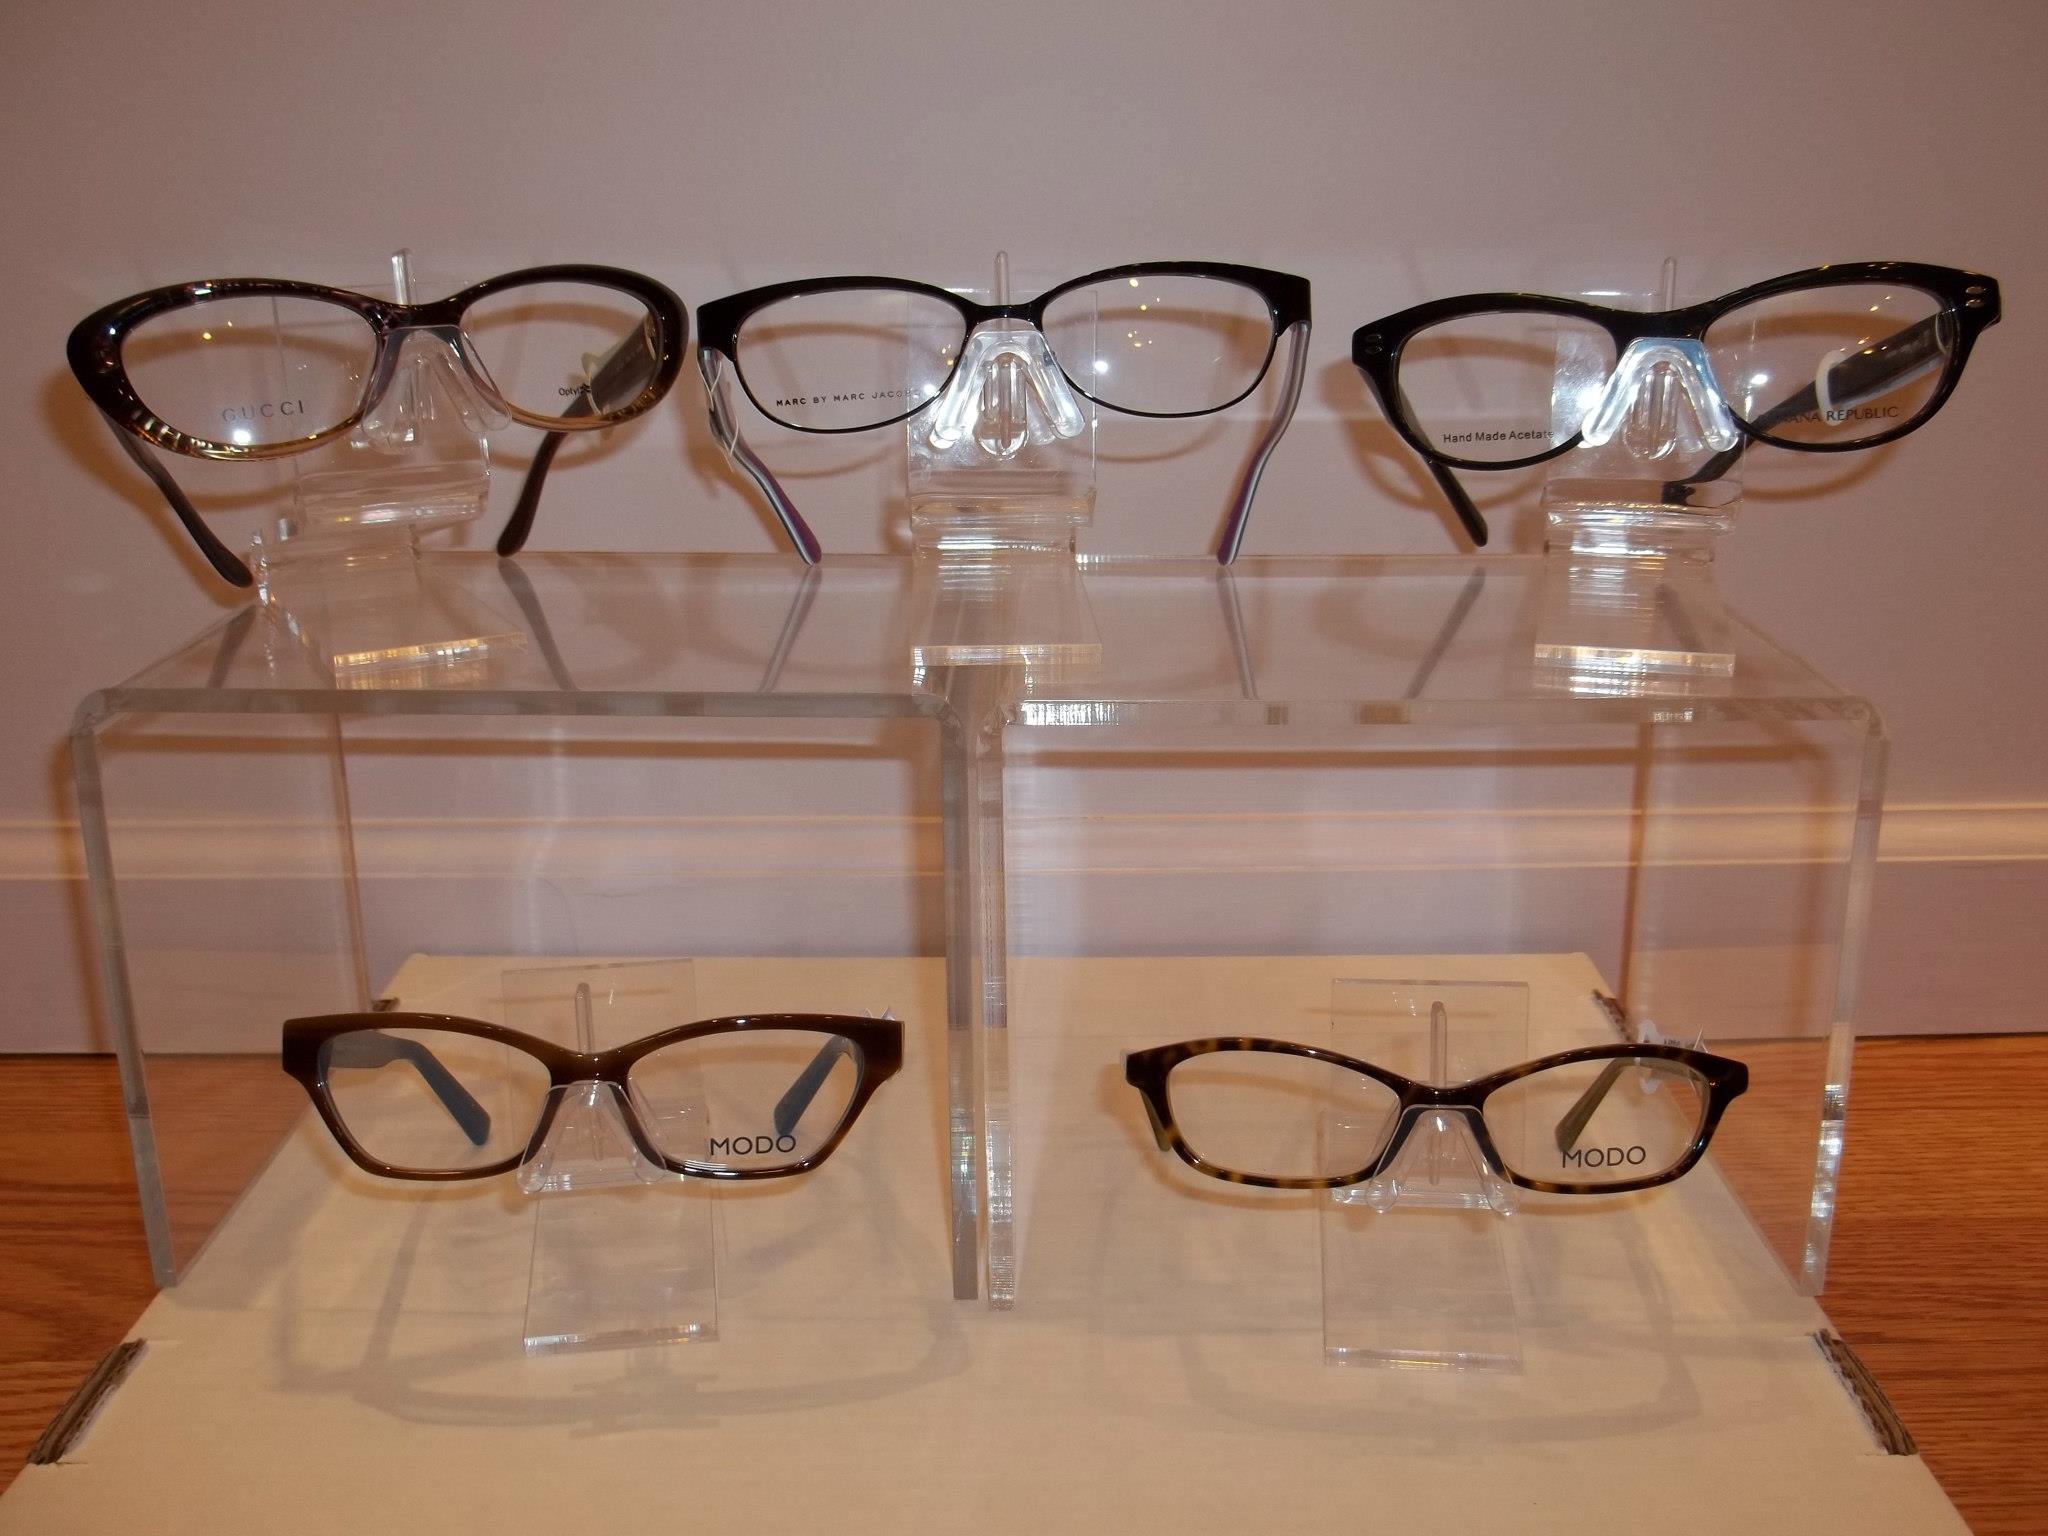 Our vast selection of women's frames